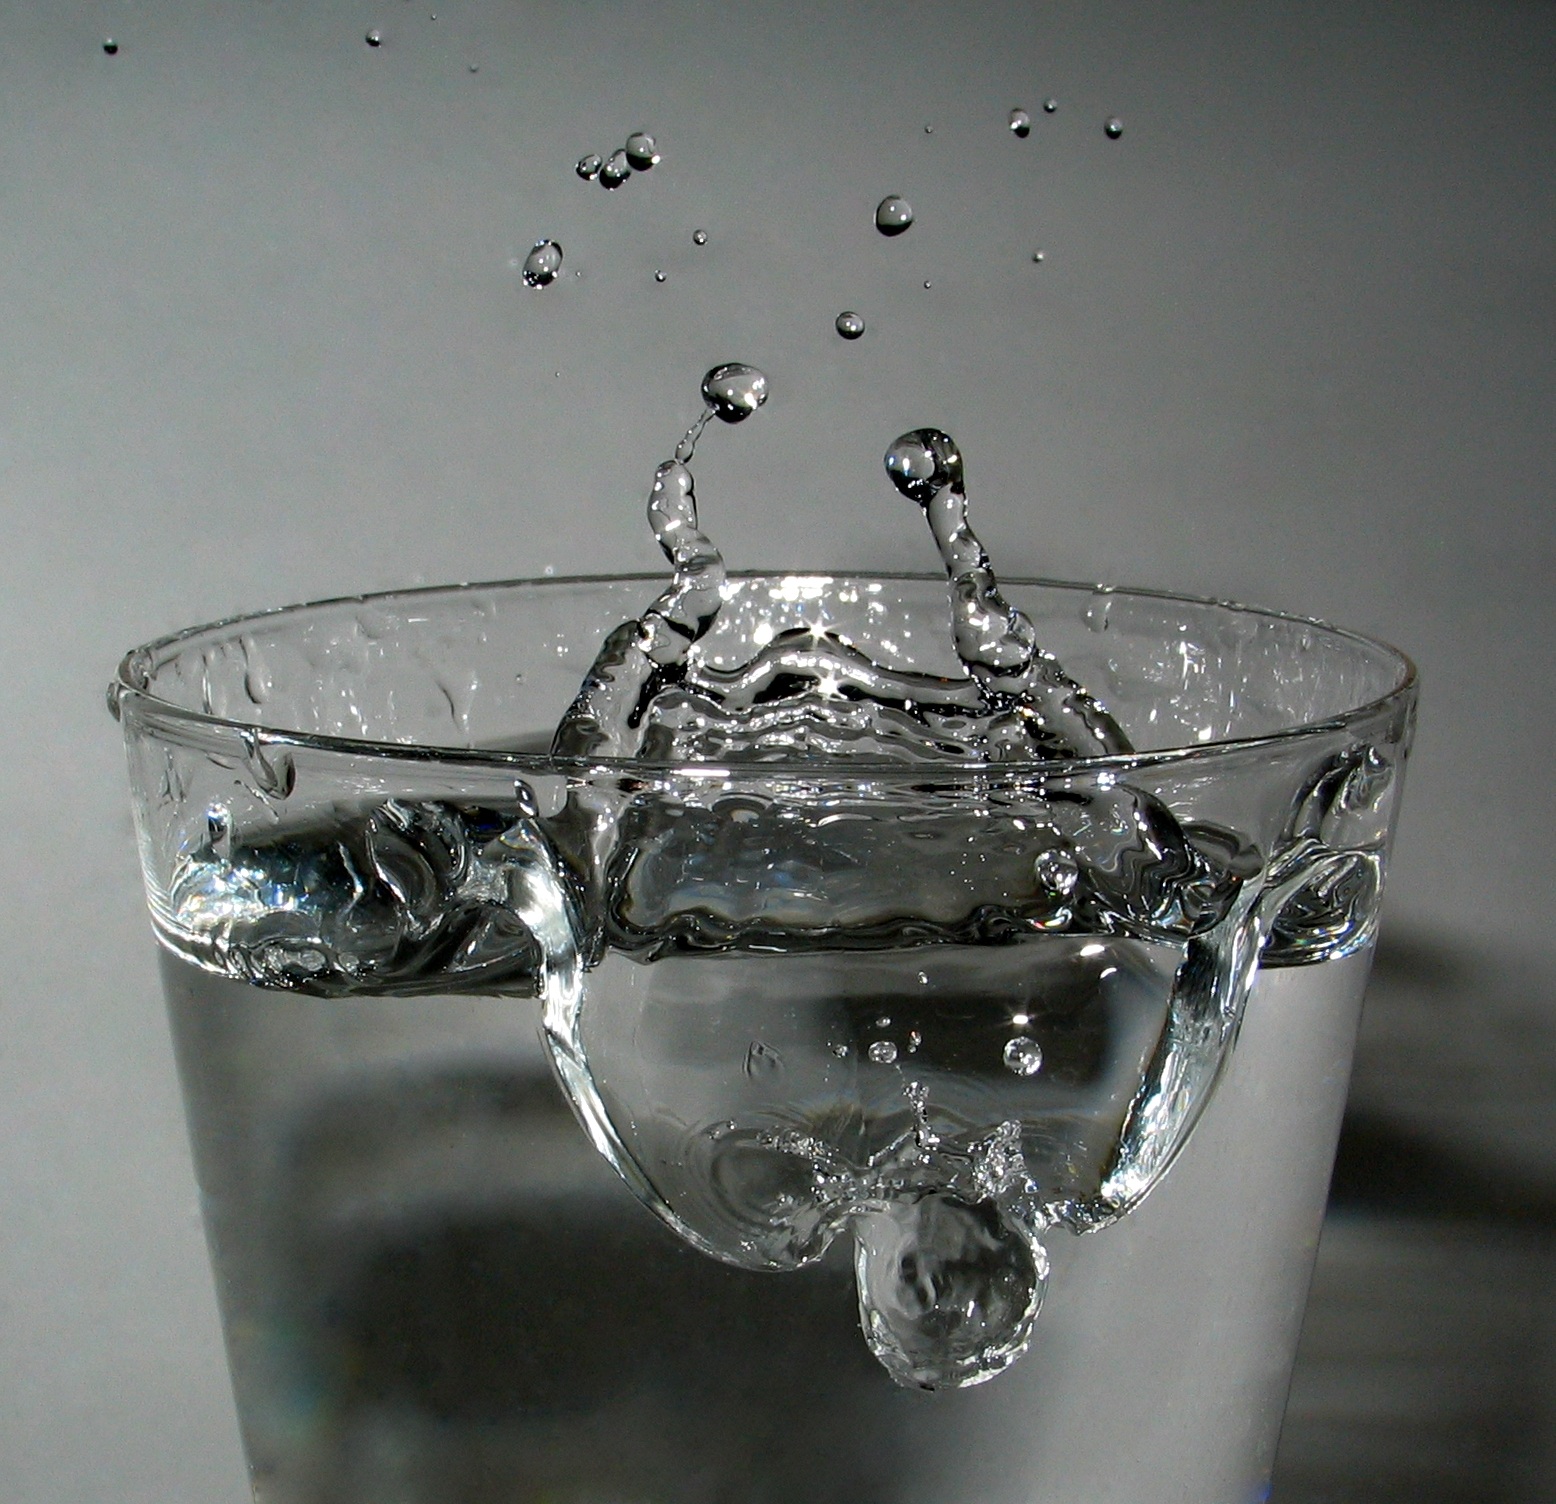 Water droplet falling into a glass